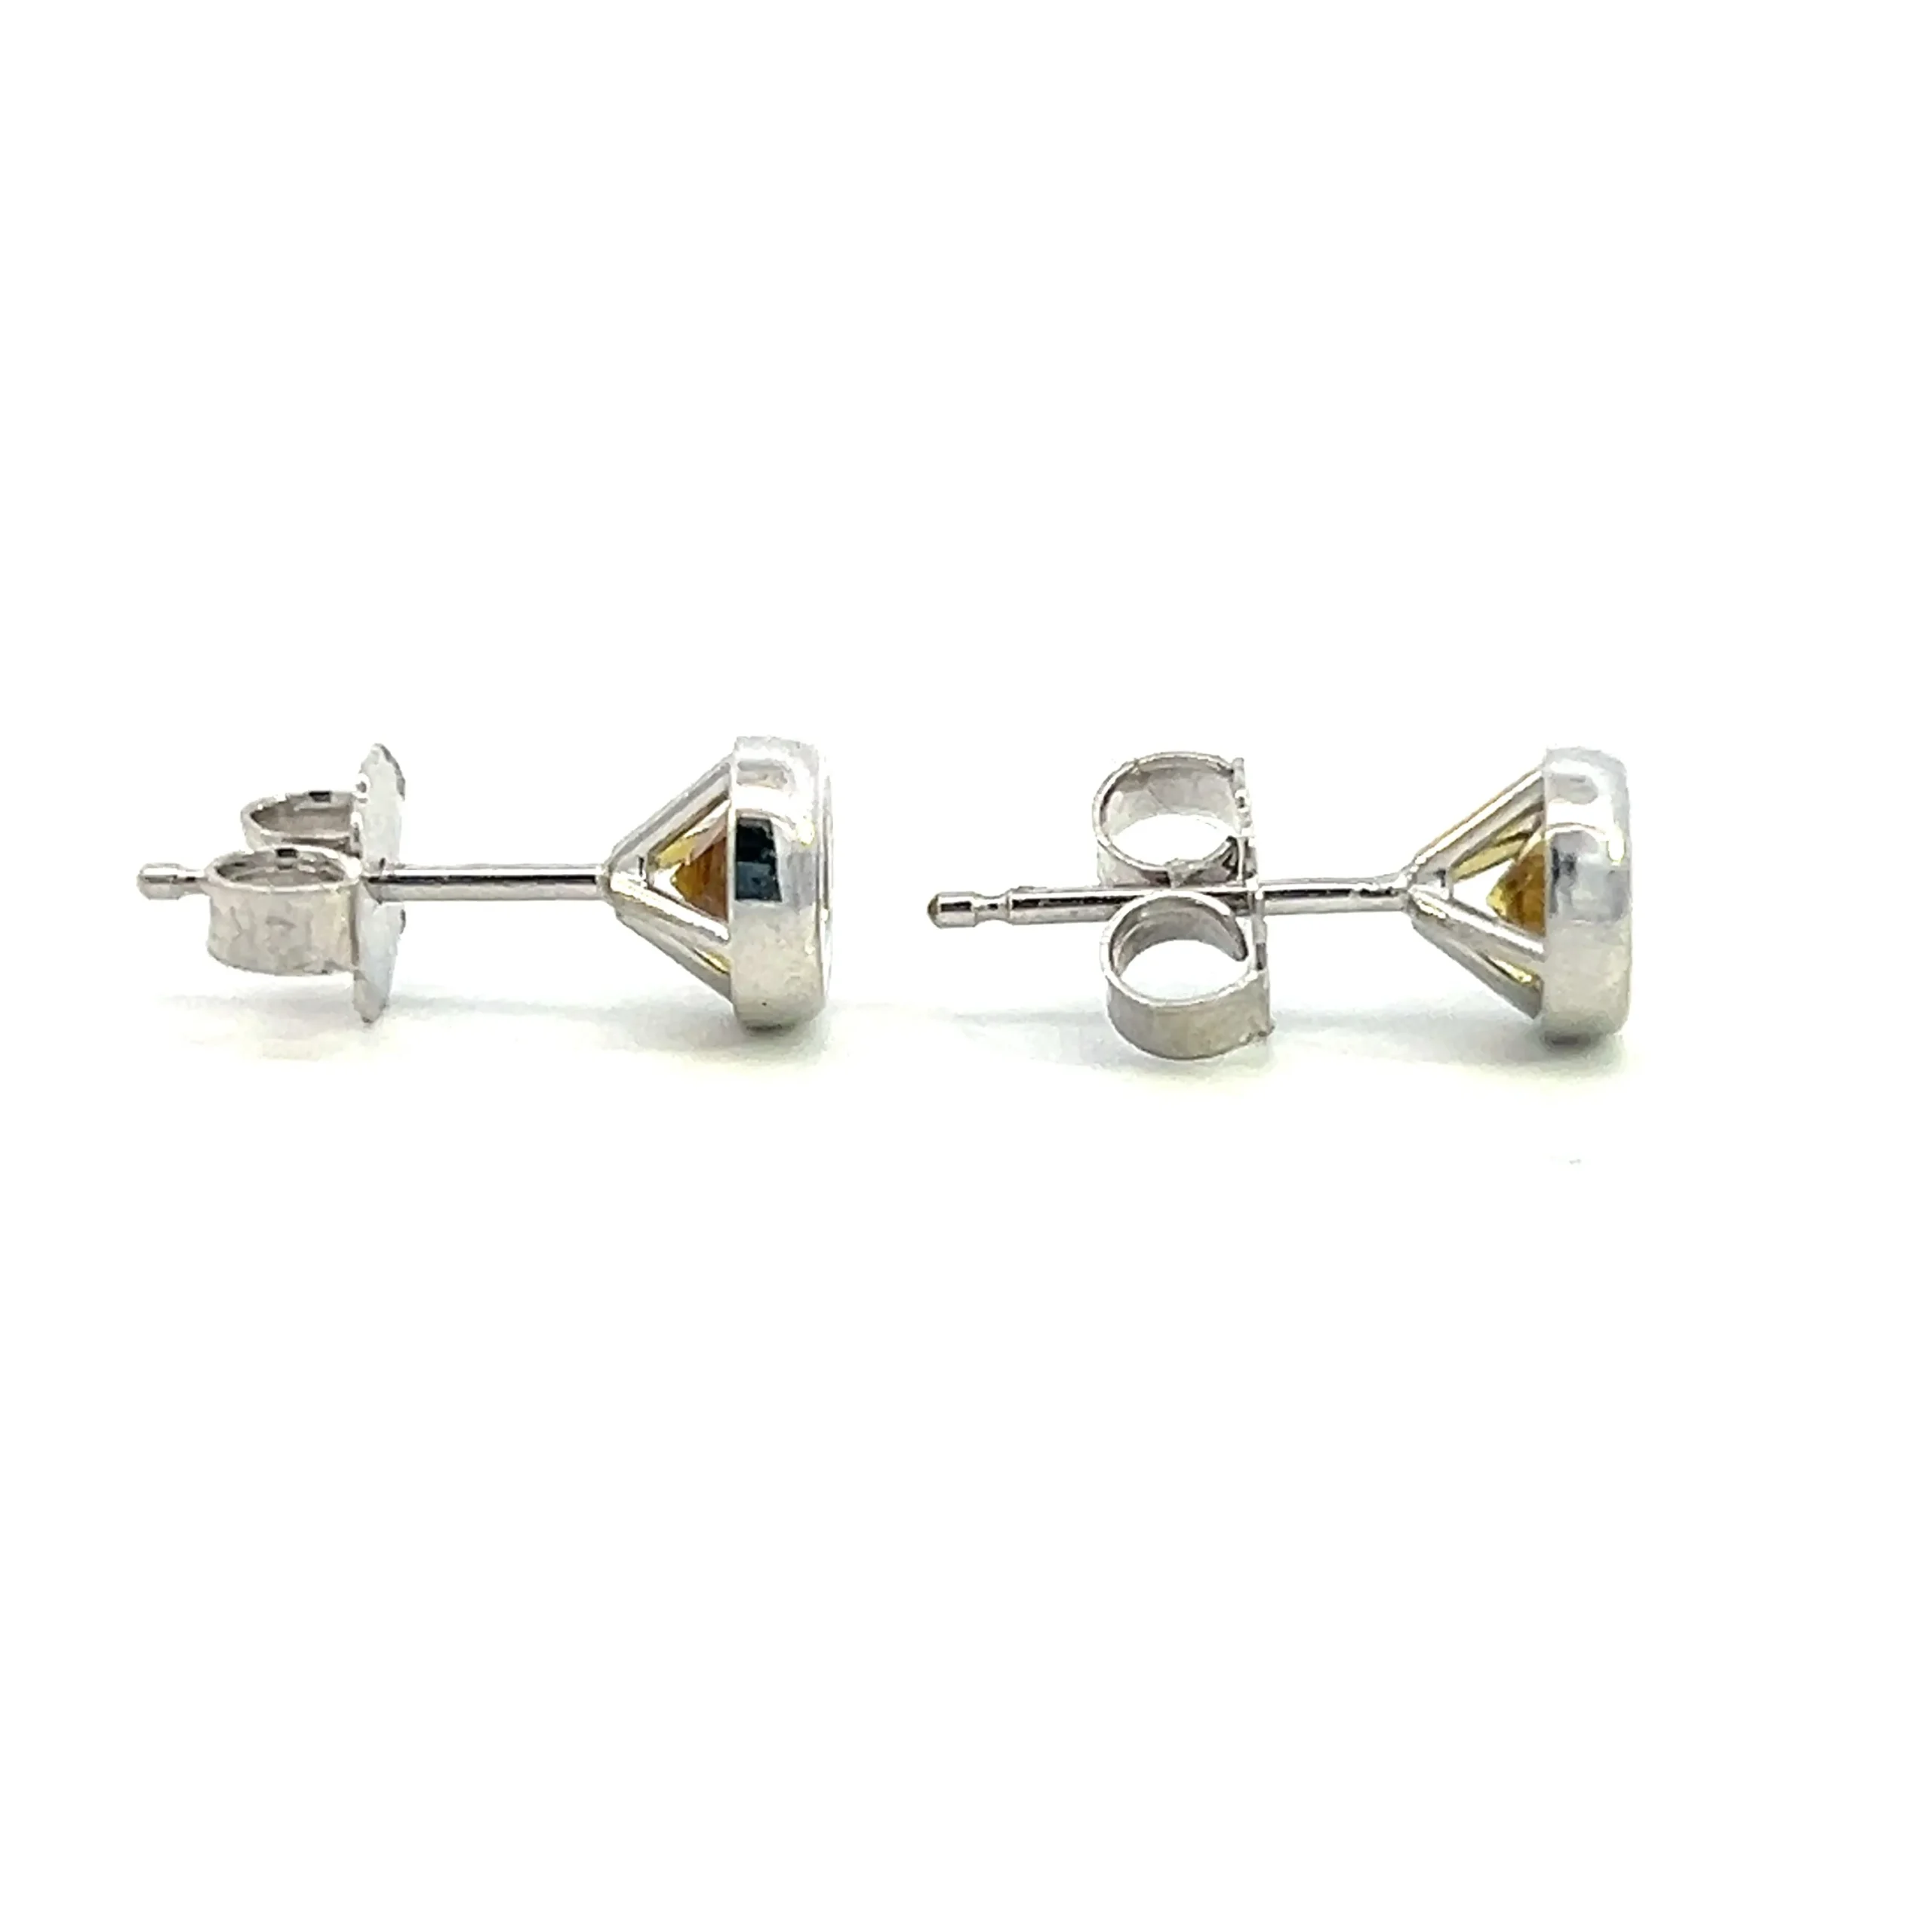 One estate pair of 14 karat white gold gemstone stud earrings containing two round-faceted yellow sapphires weighing 0,84 carat total weight in bezel settings. The earrings are secured with friction posts and backs. Stamped "14K". Total weight of 1.20 grams.